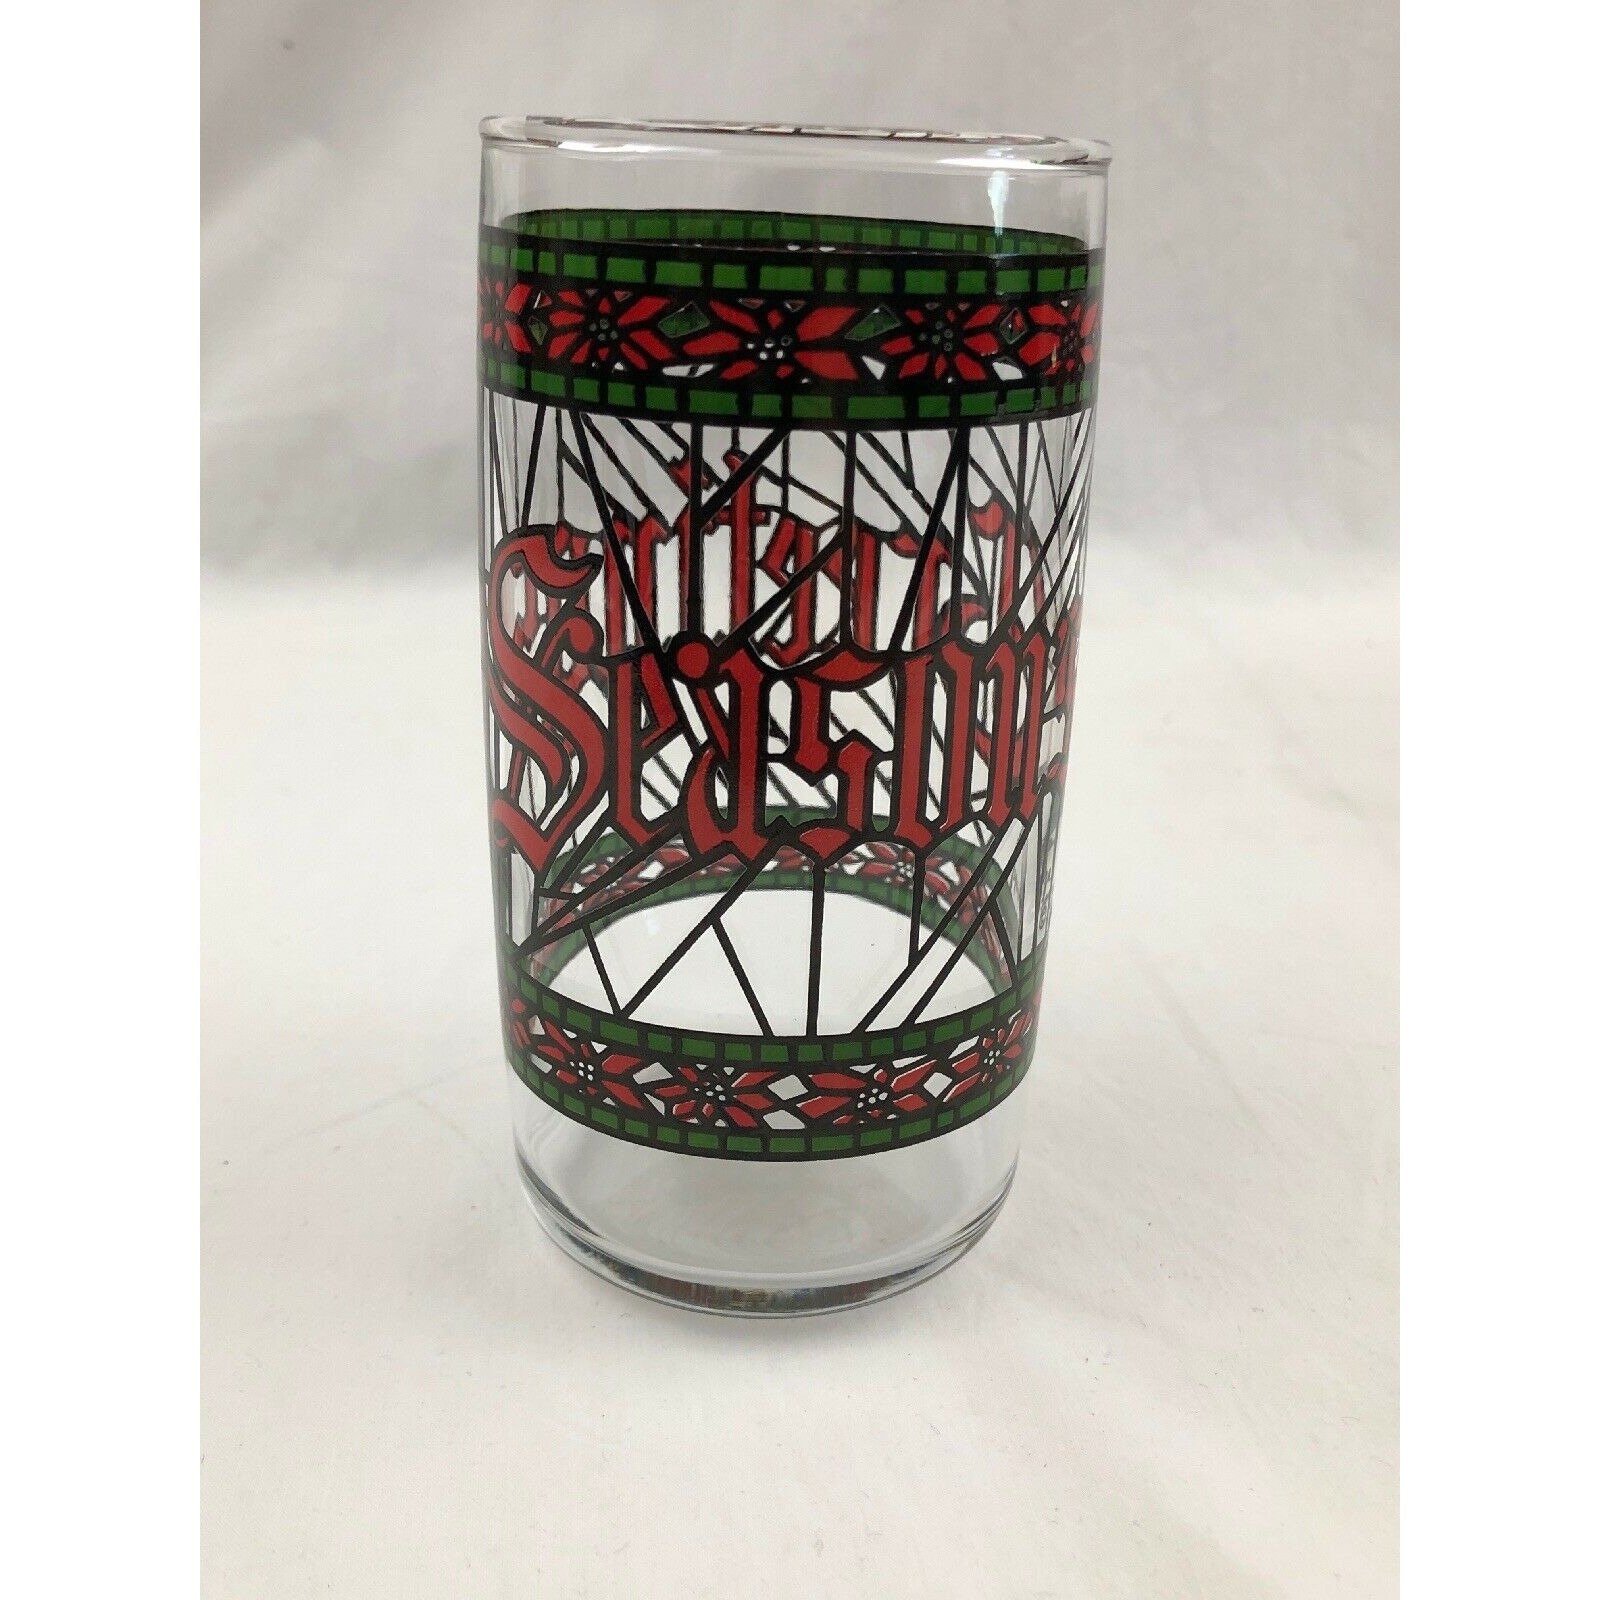 4 Houze Vintage Seasons Greetings Stained Glass Cups